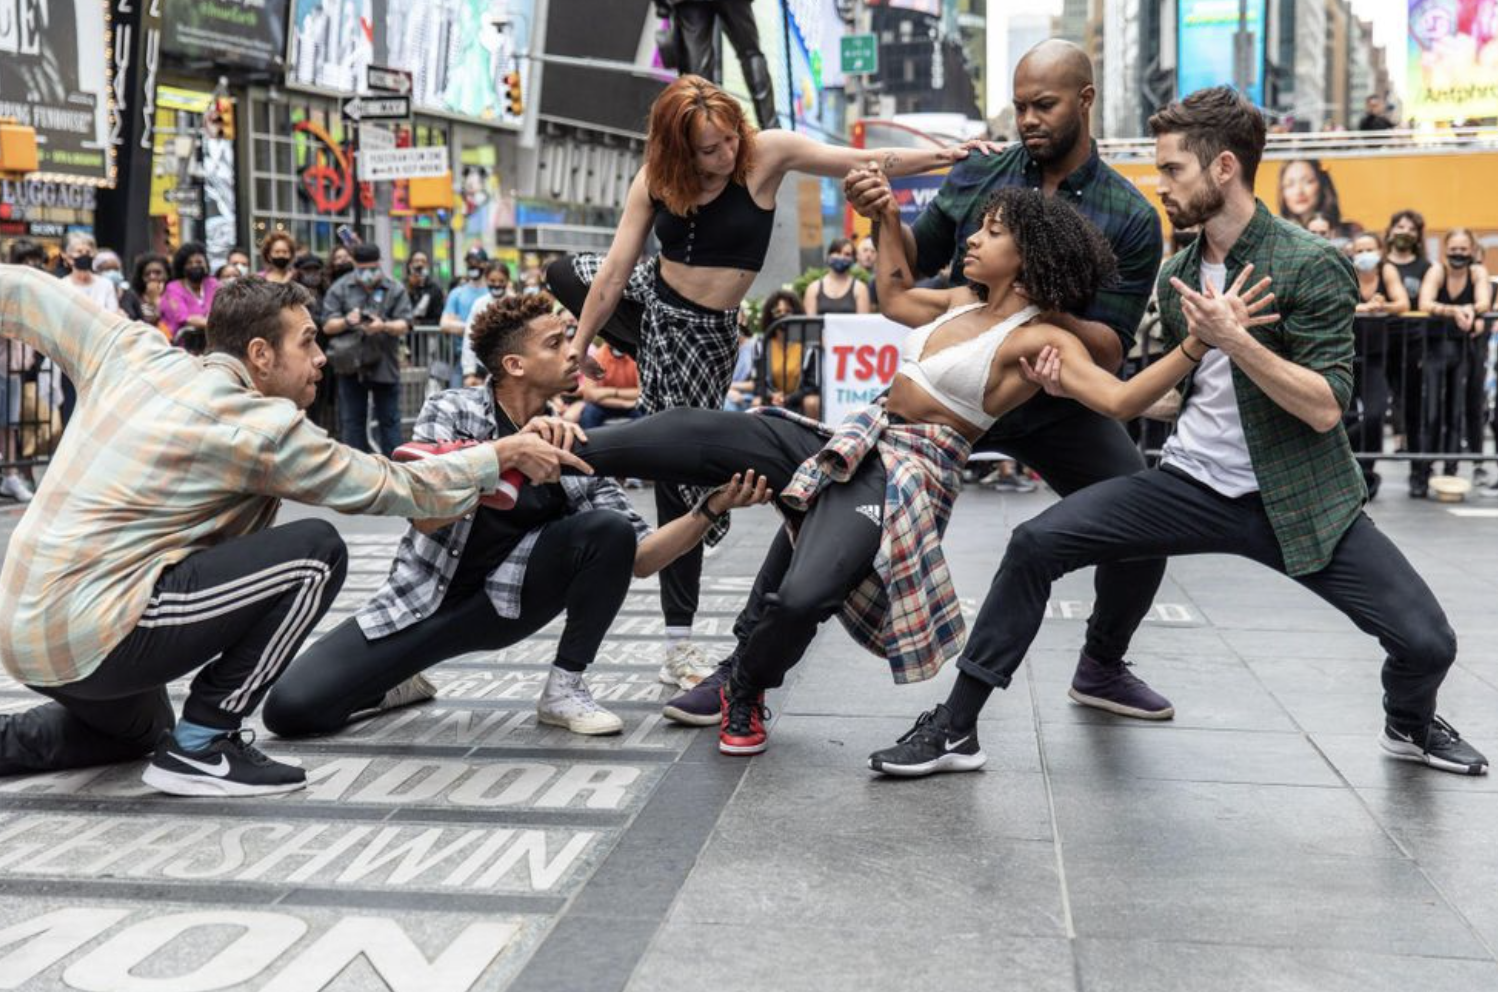 How TSQ Project Brought Dance Back to Times Square